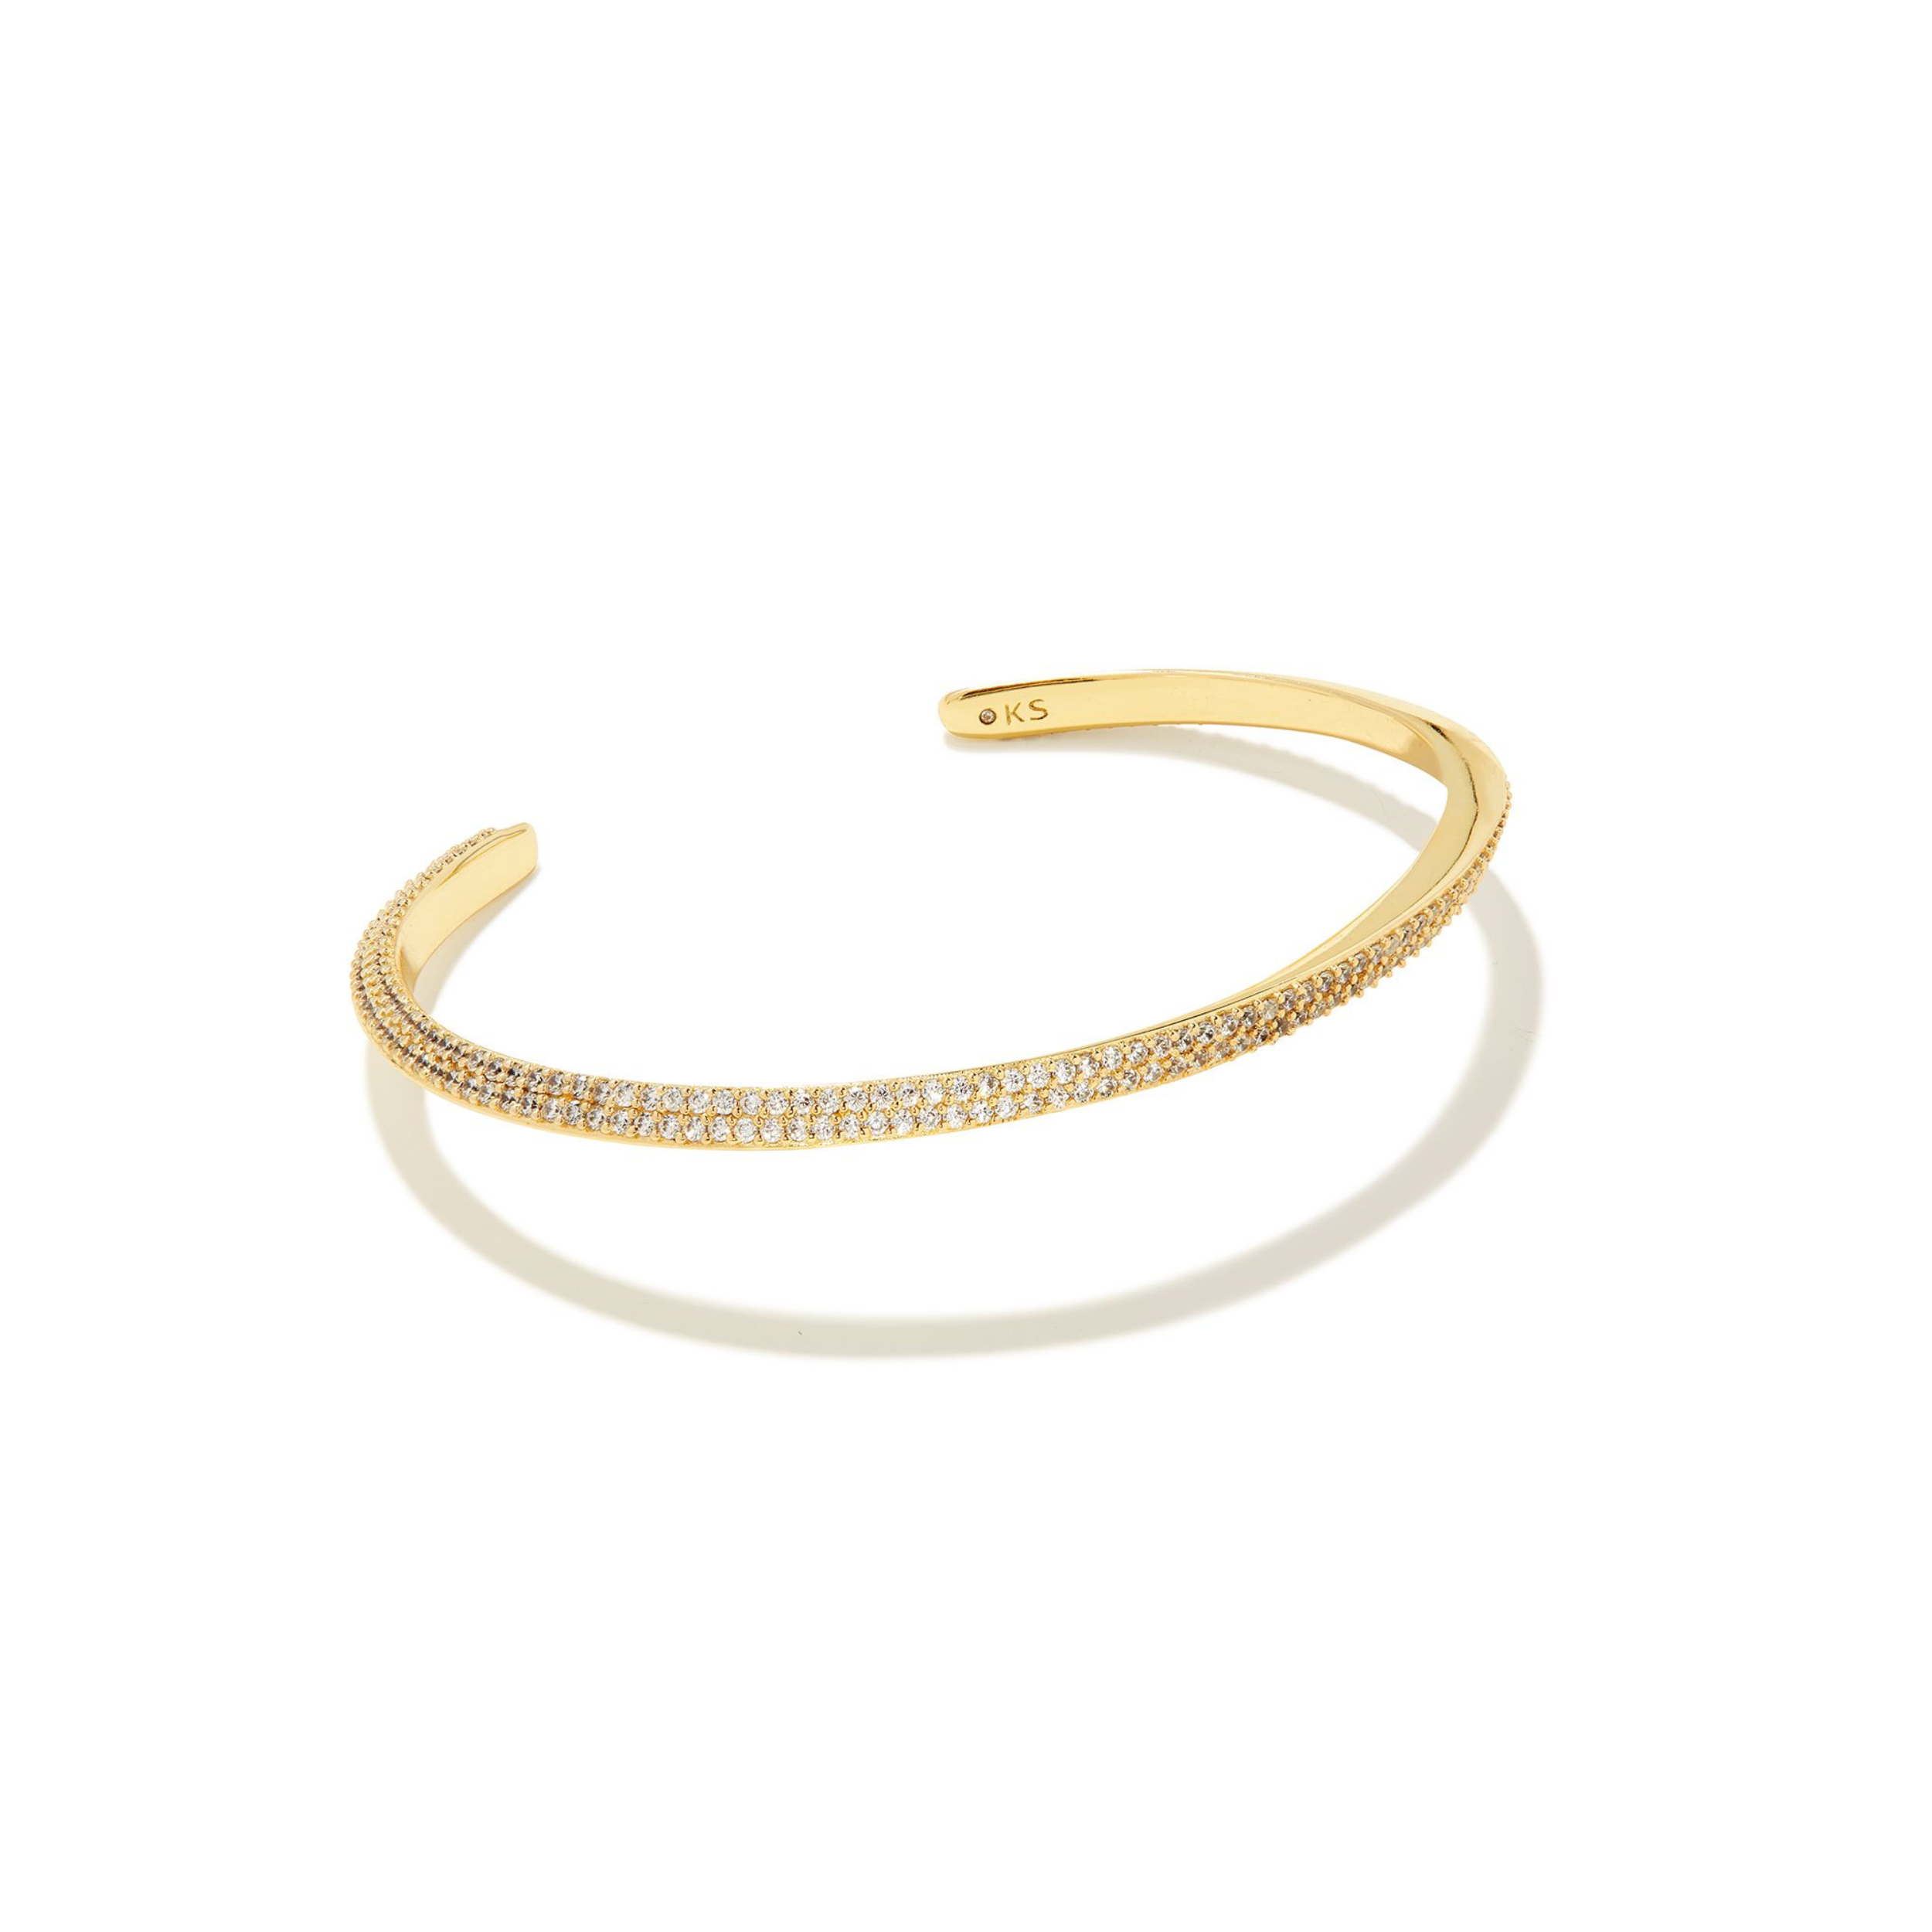 Gold cuff bracelet with cz crystals pictured on a white background. 